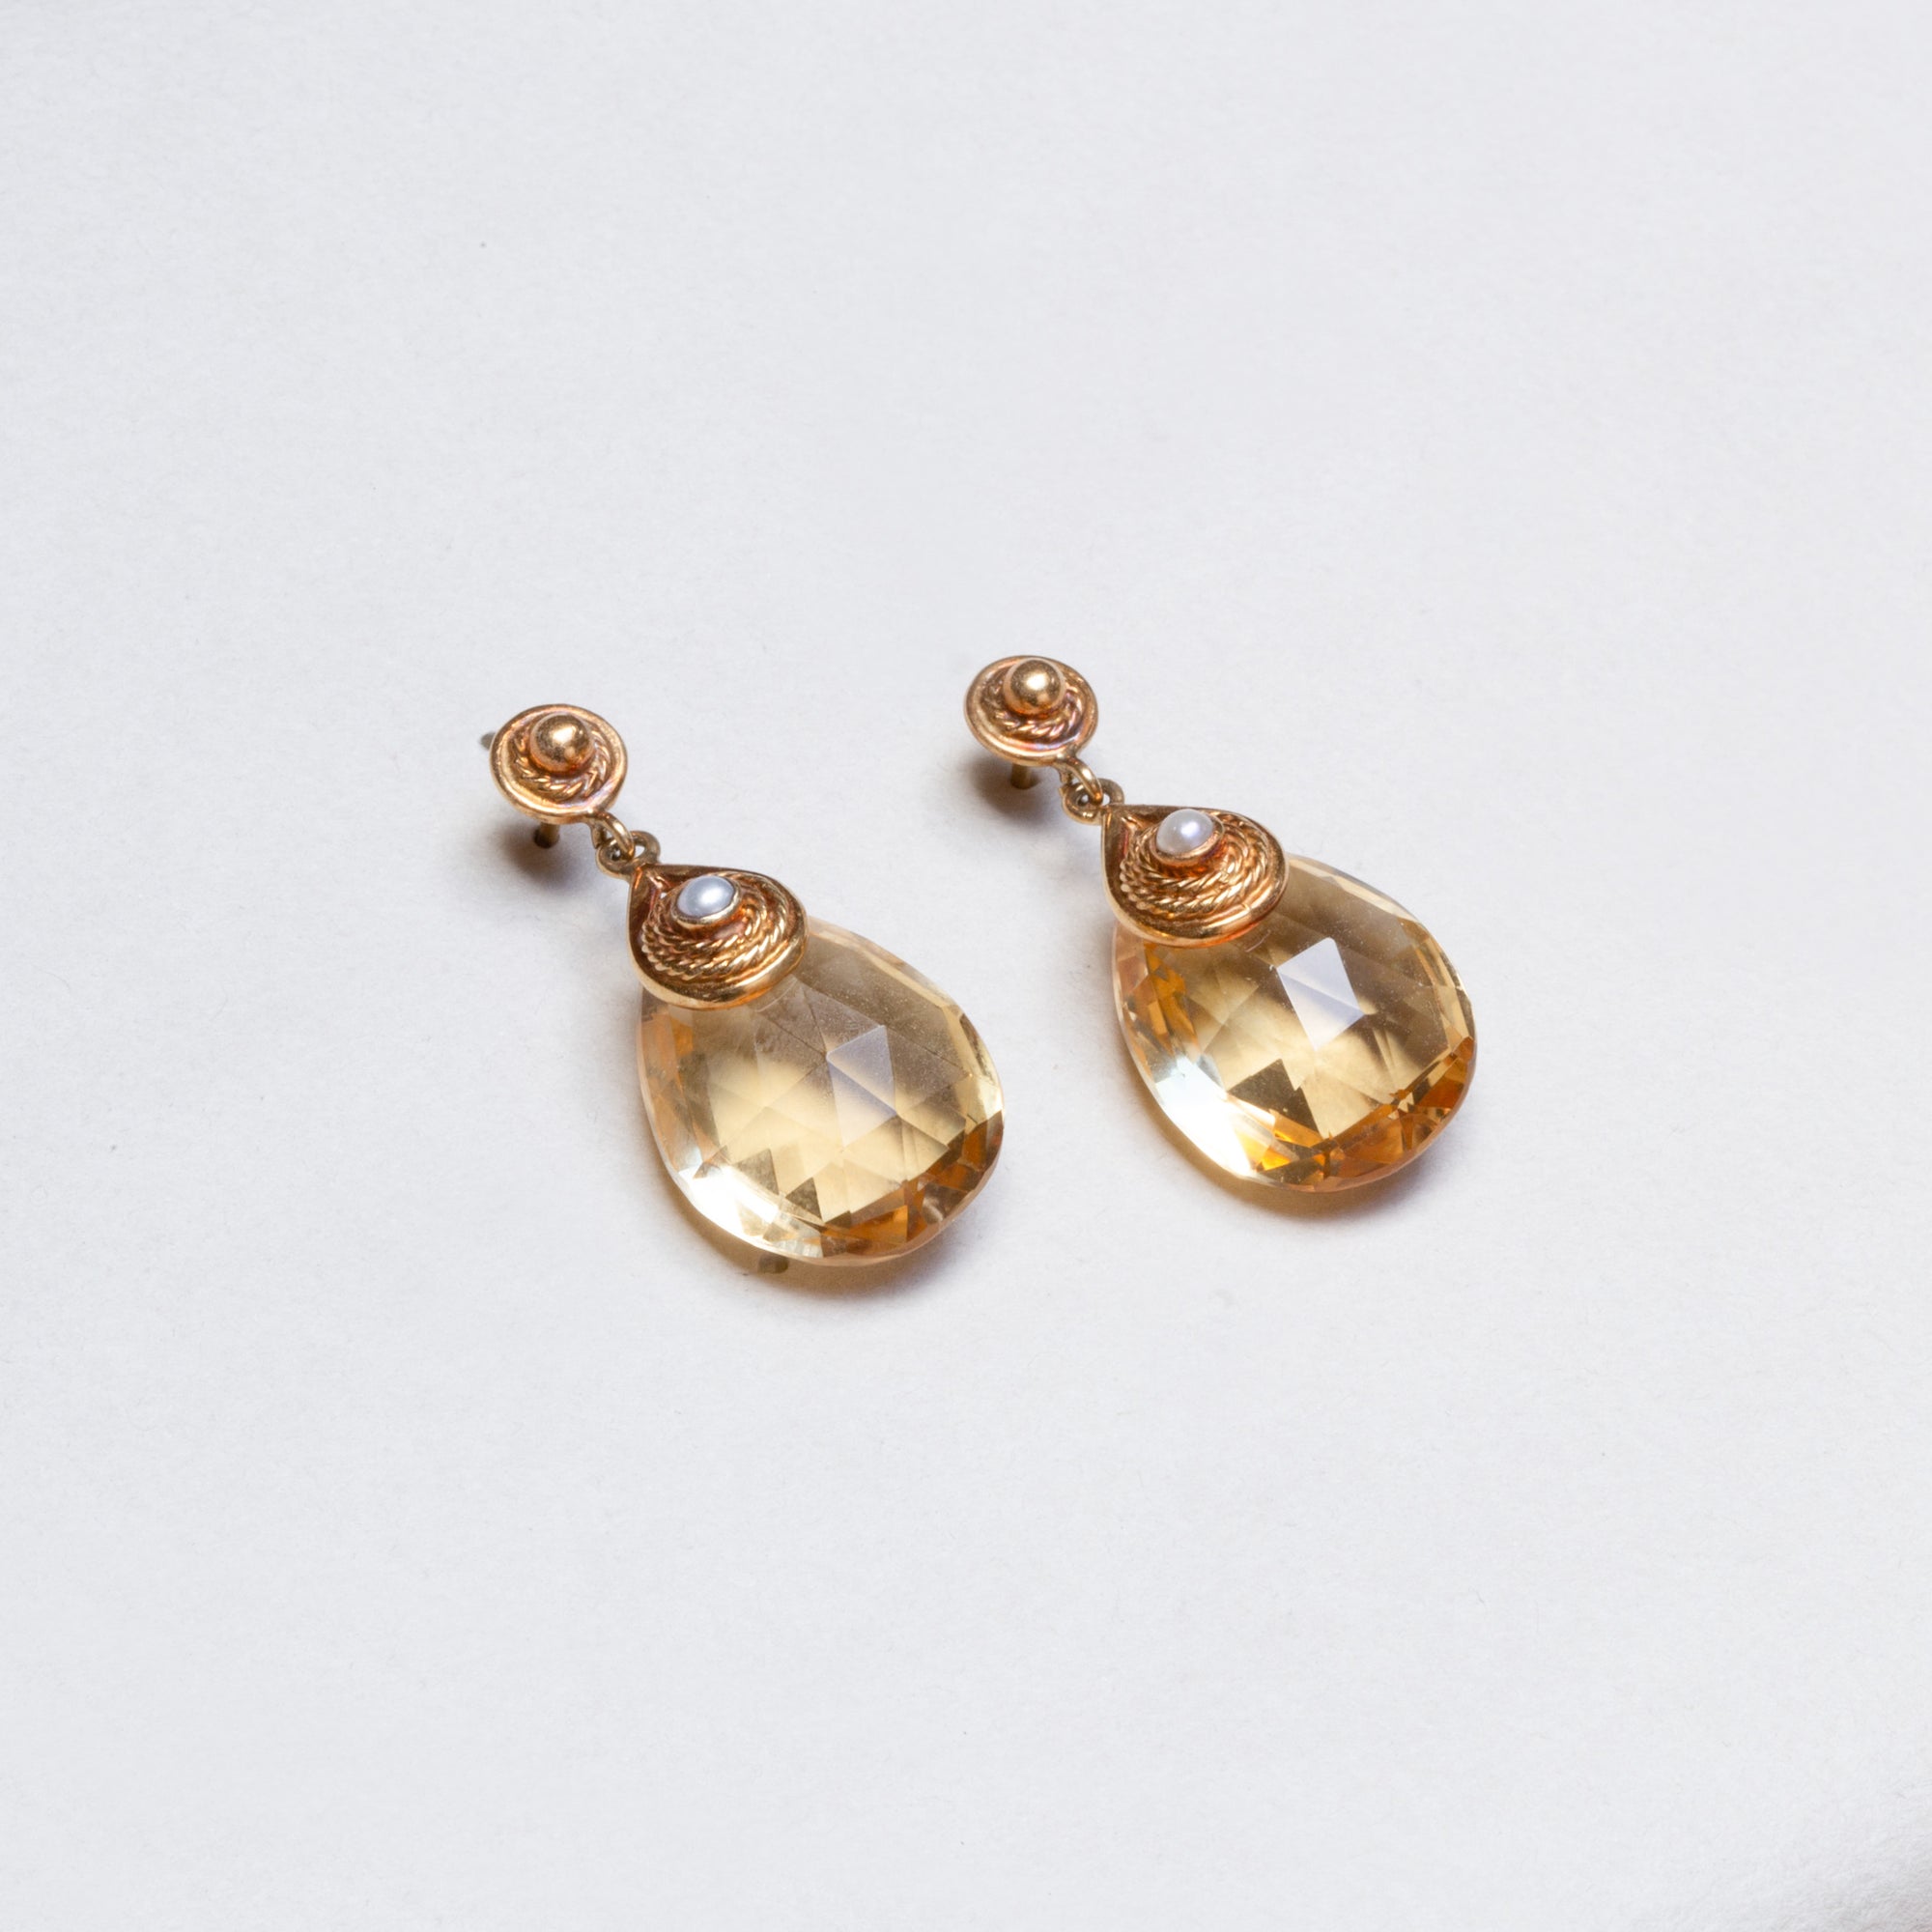 Vintage Drop Earrings with Citrine and Pearl